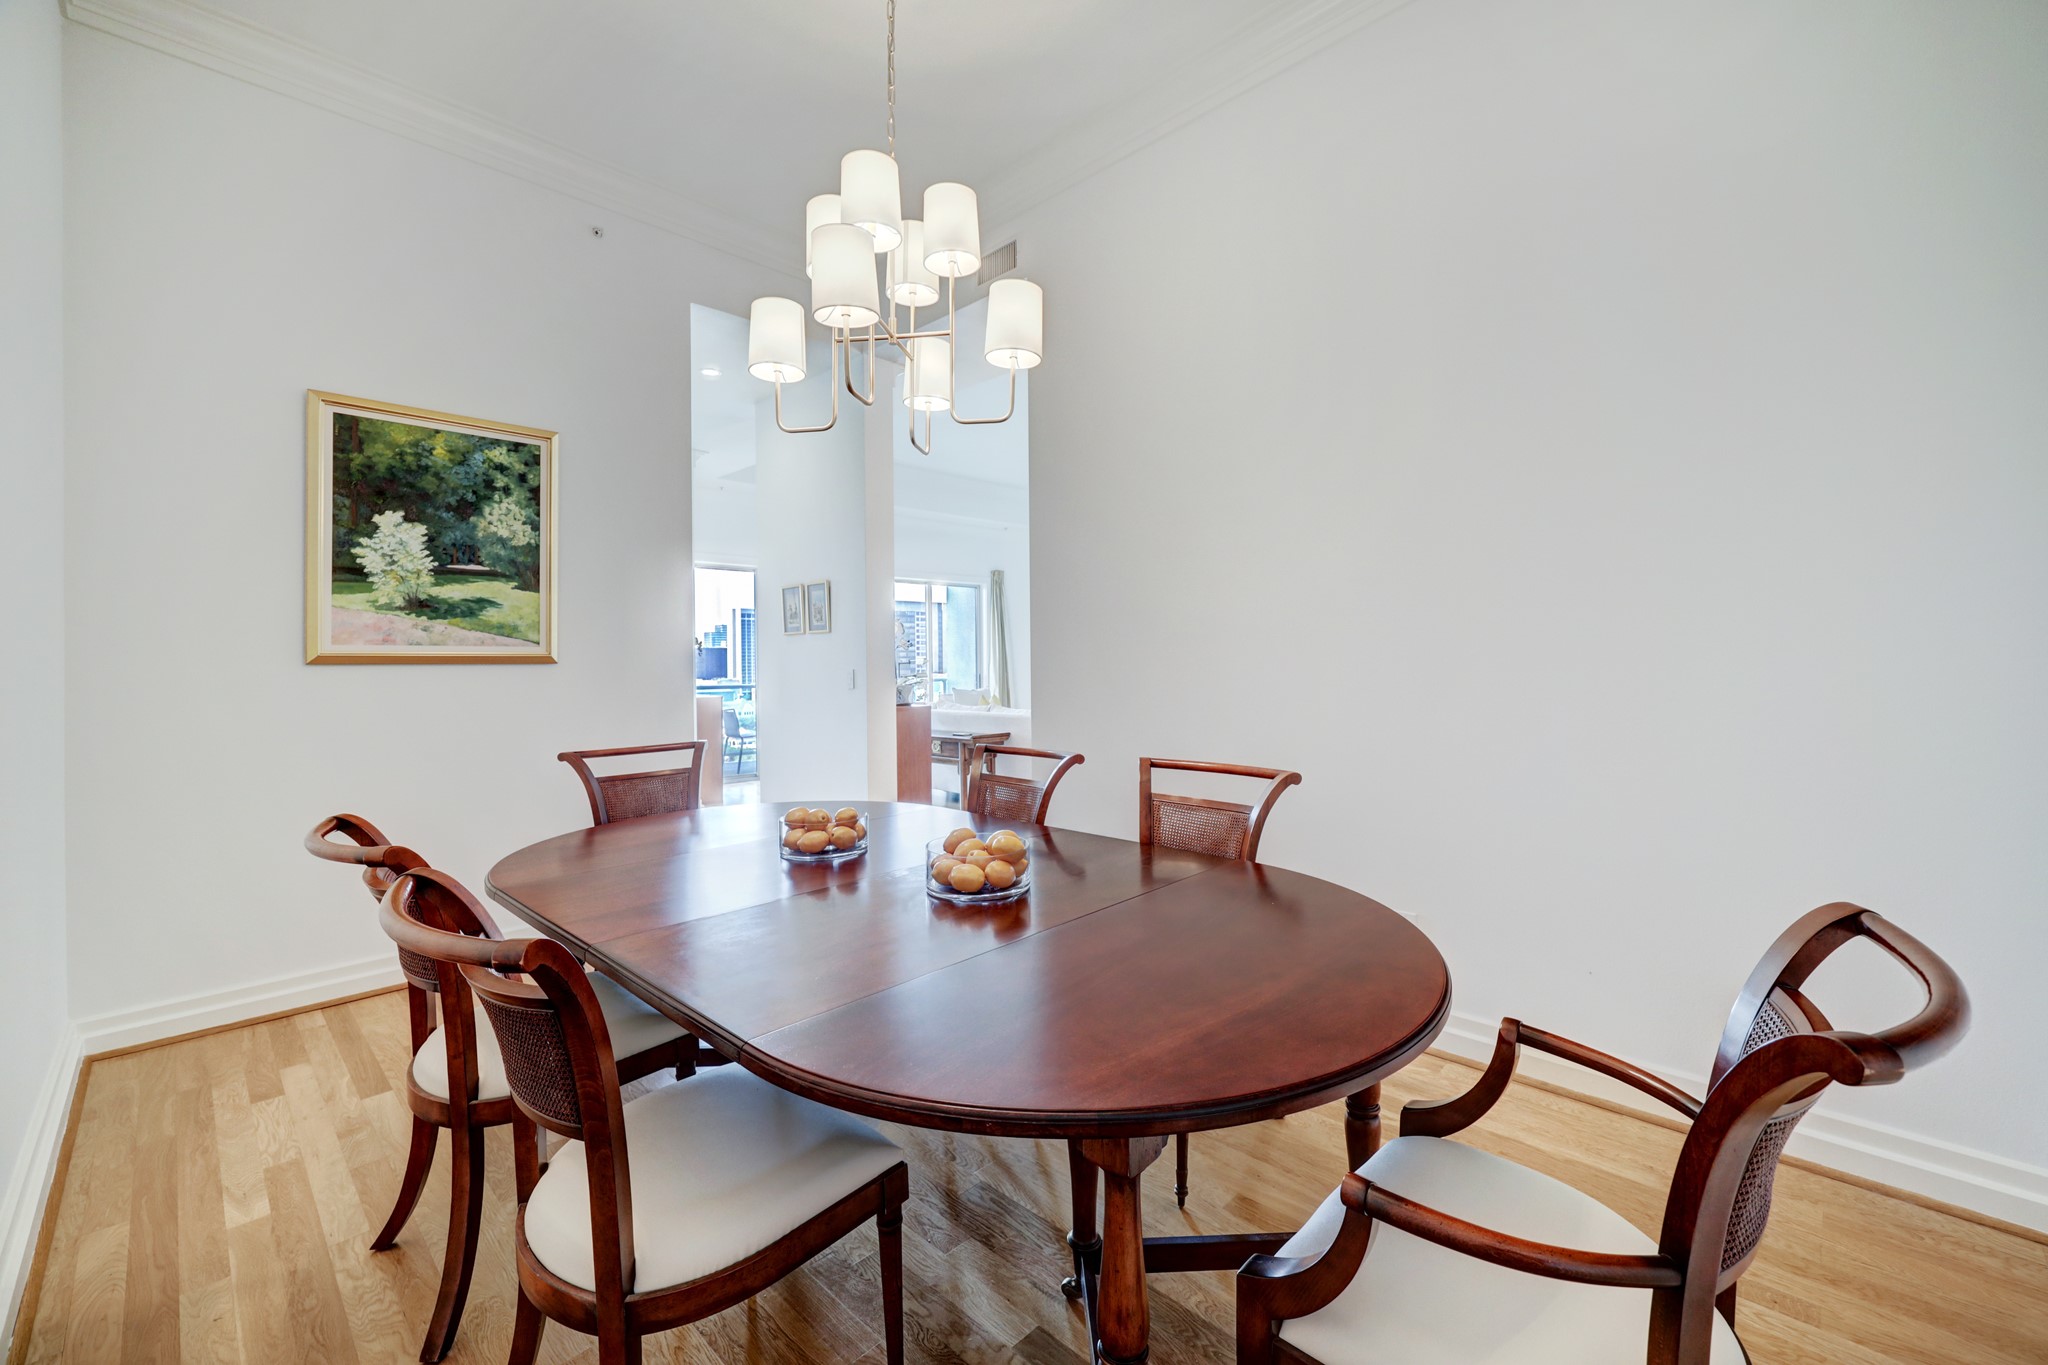 The dining room can also be used as an additional living area.